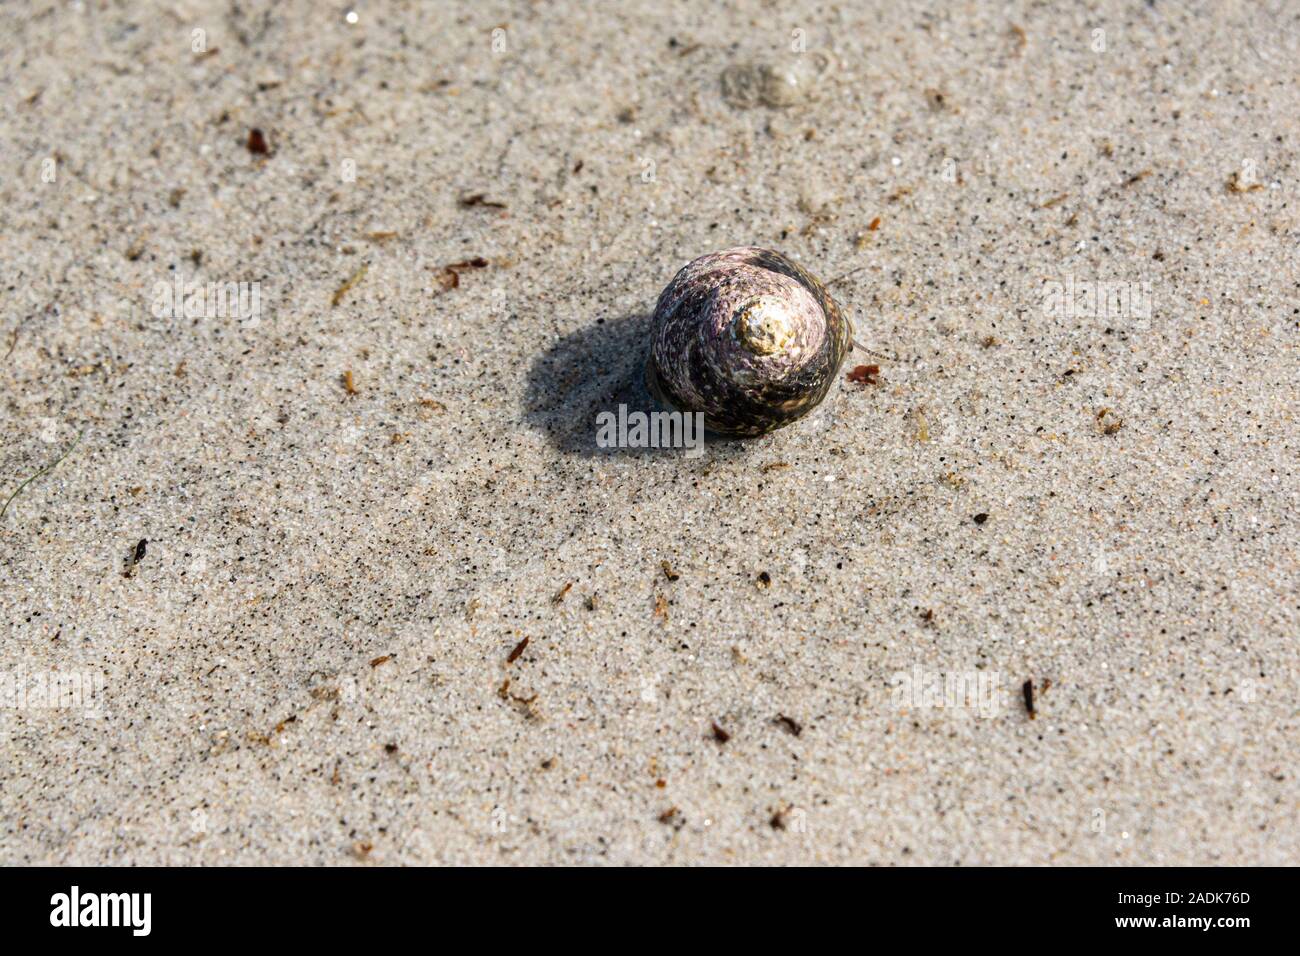 A top shell snail making tracks in wet sand Stock Photo